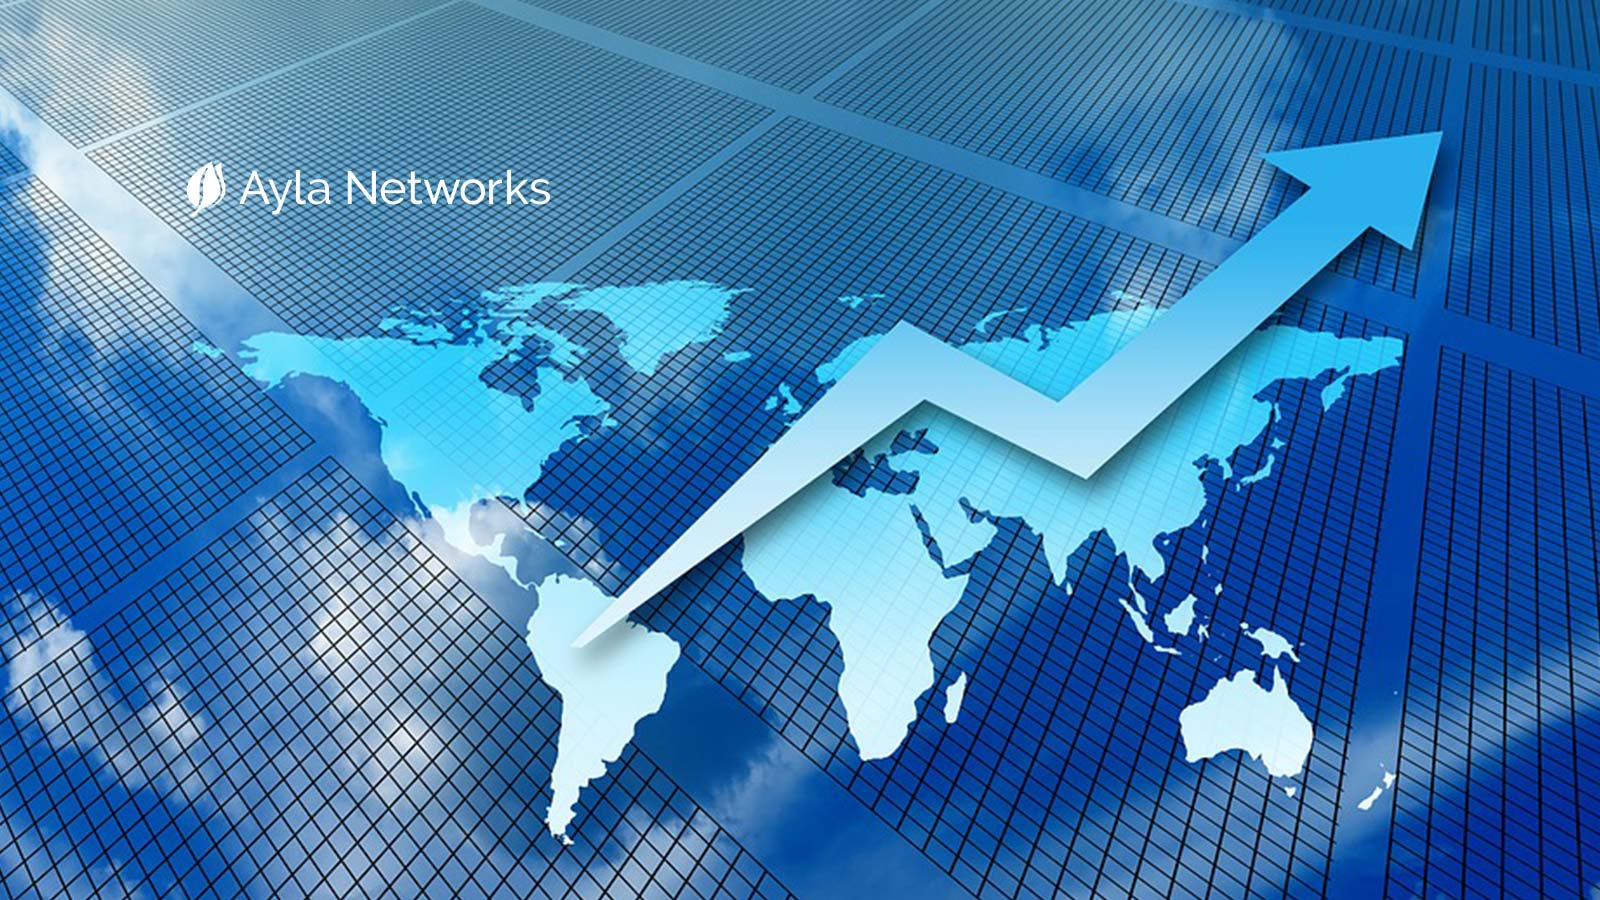 Ayla Networks Raises $20 Million Growth Equity Financing to Accelerate Momentum in IoT Markets